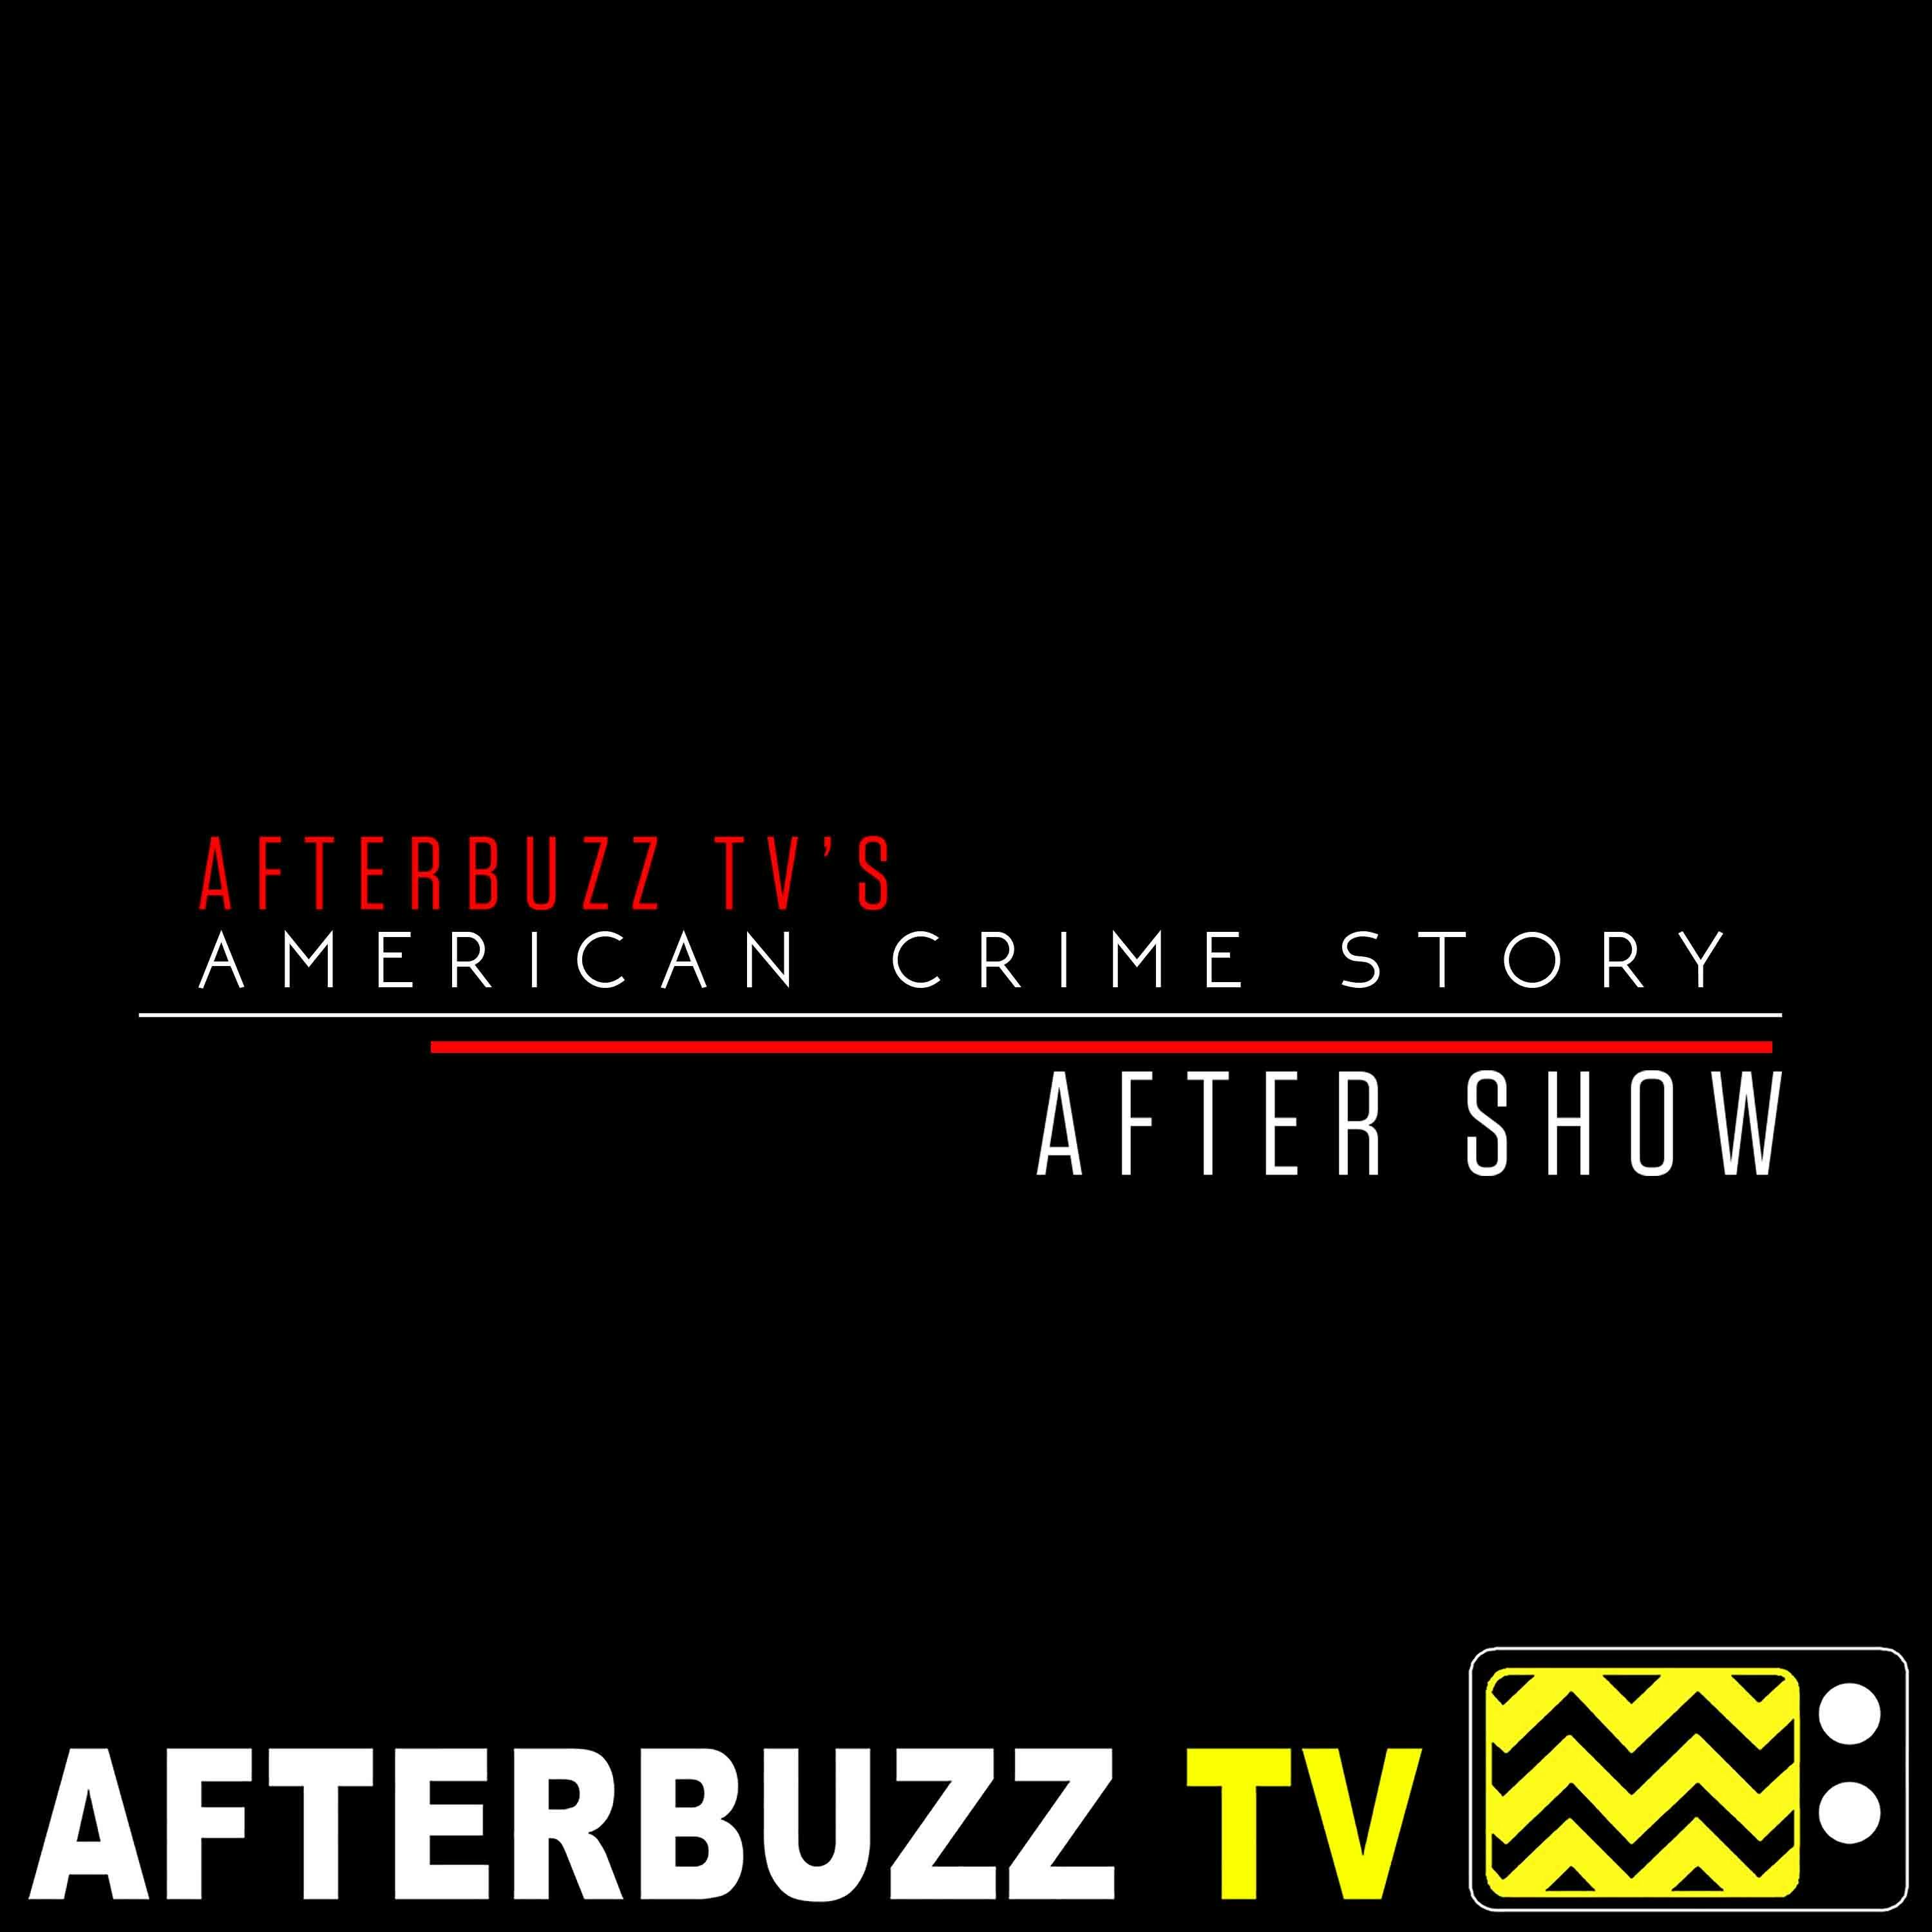 The People vs OJ Simpson | The Race Card E:5 | AfterBuzz TV AfterShow